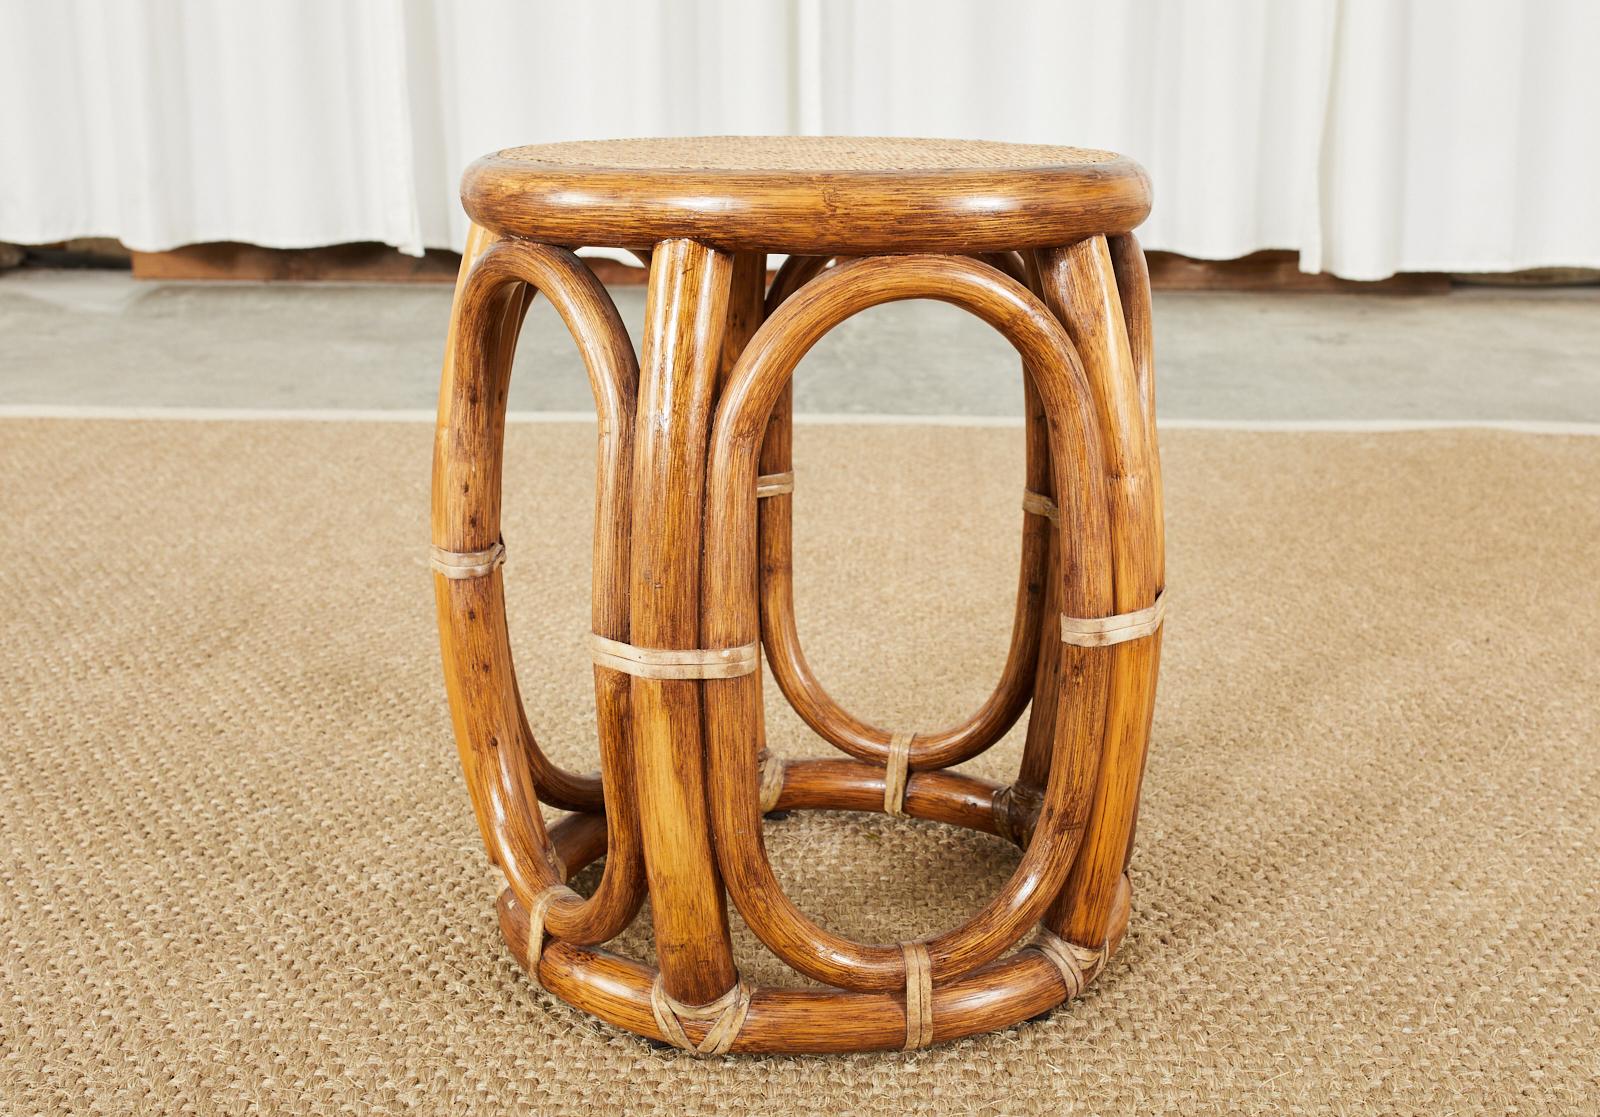 Organic modern style taboret drum formed stool or drink table made by McGuire. Crafted from a rattan frame with round ends conjoined by oval windows on the sides. The table features a woven grasscloth or raffia style wicker top that is inset.